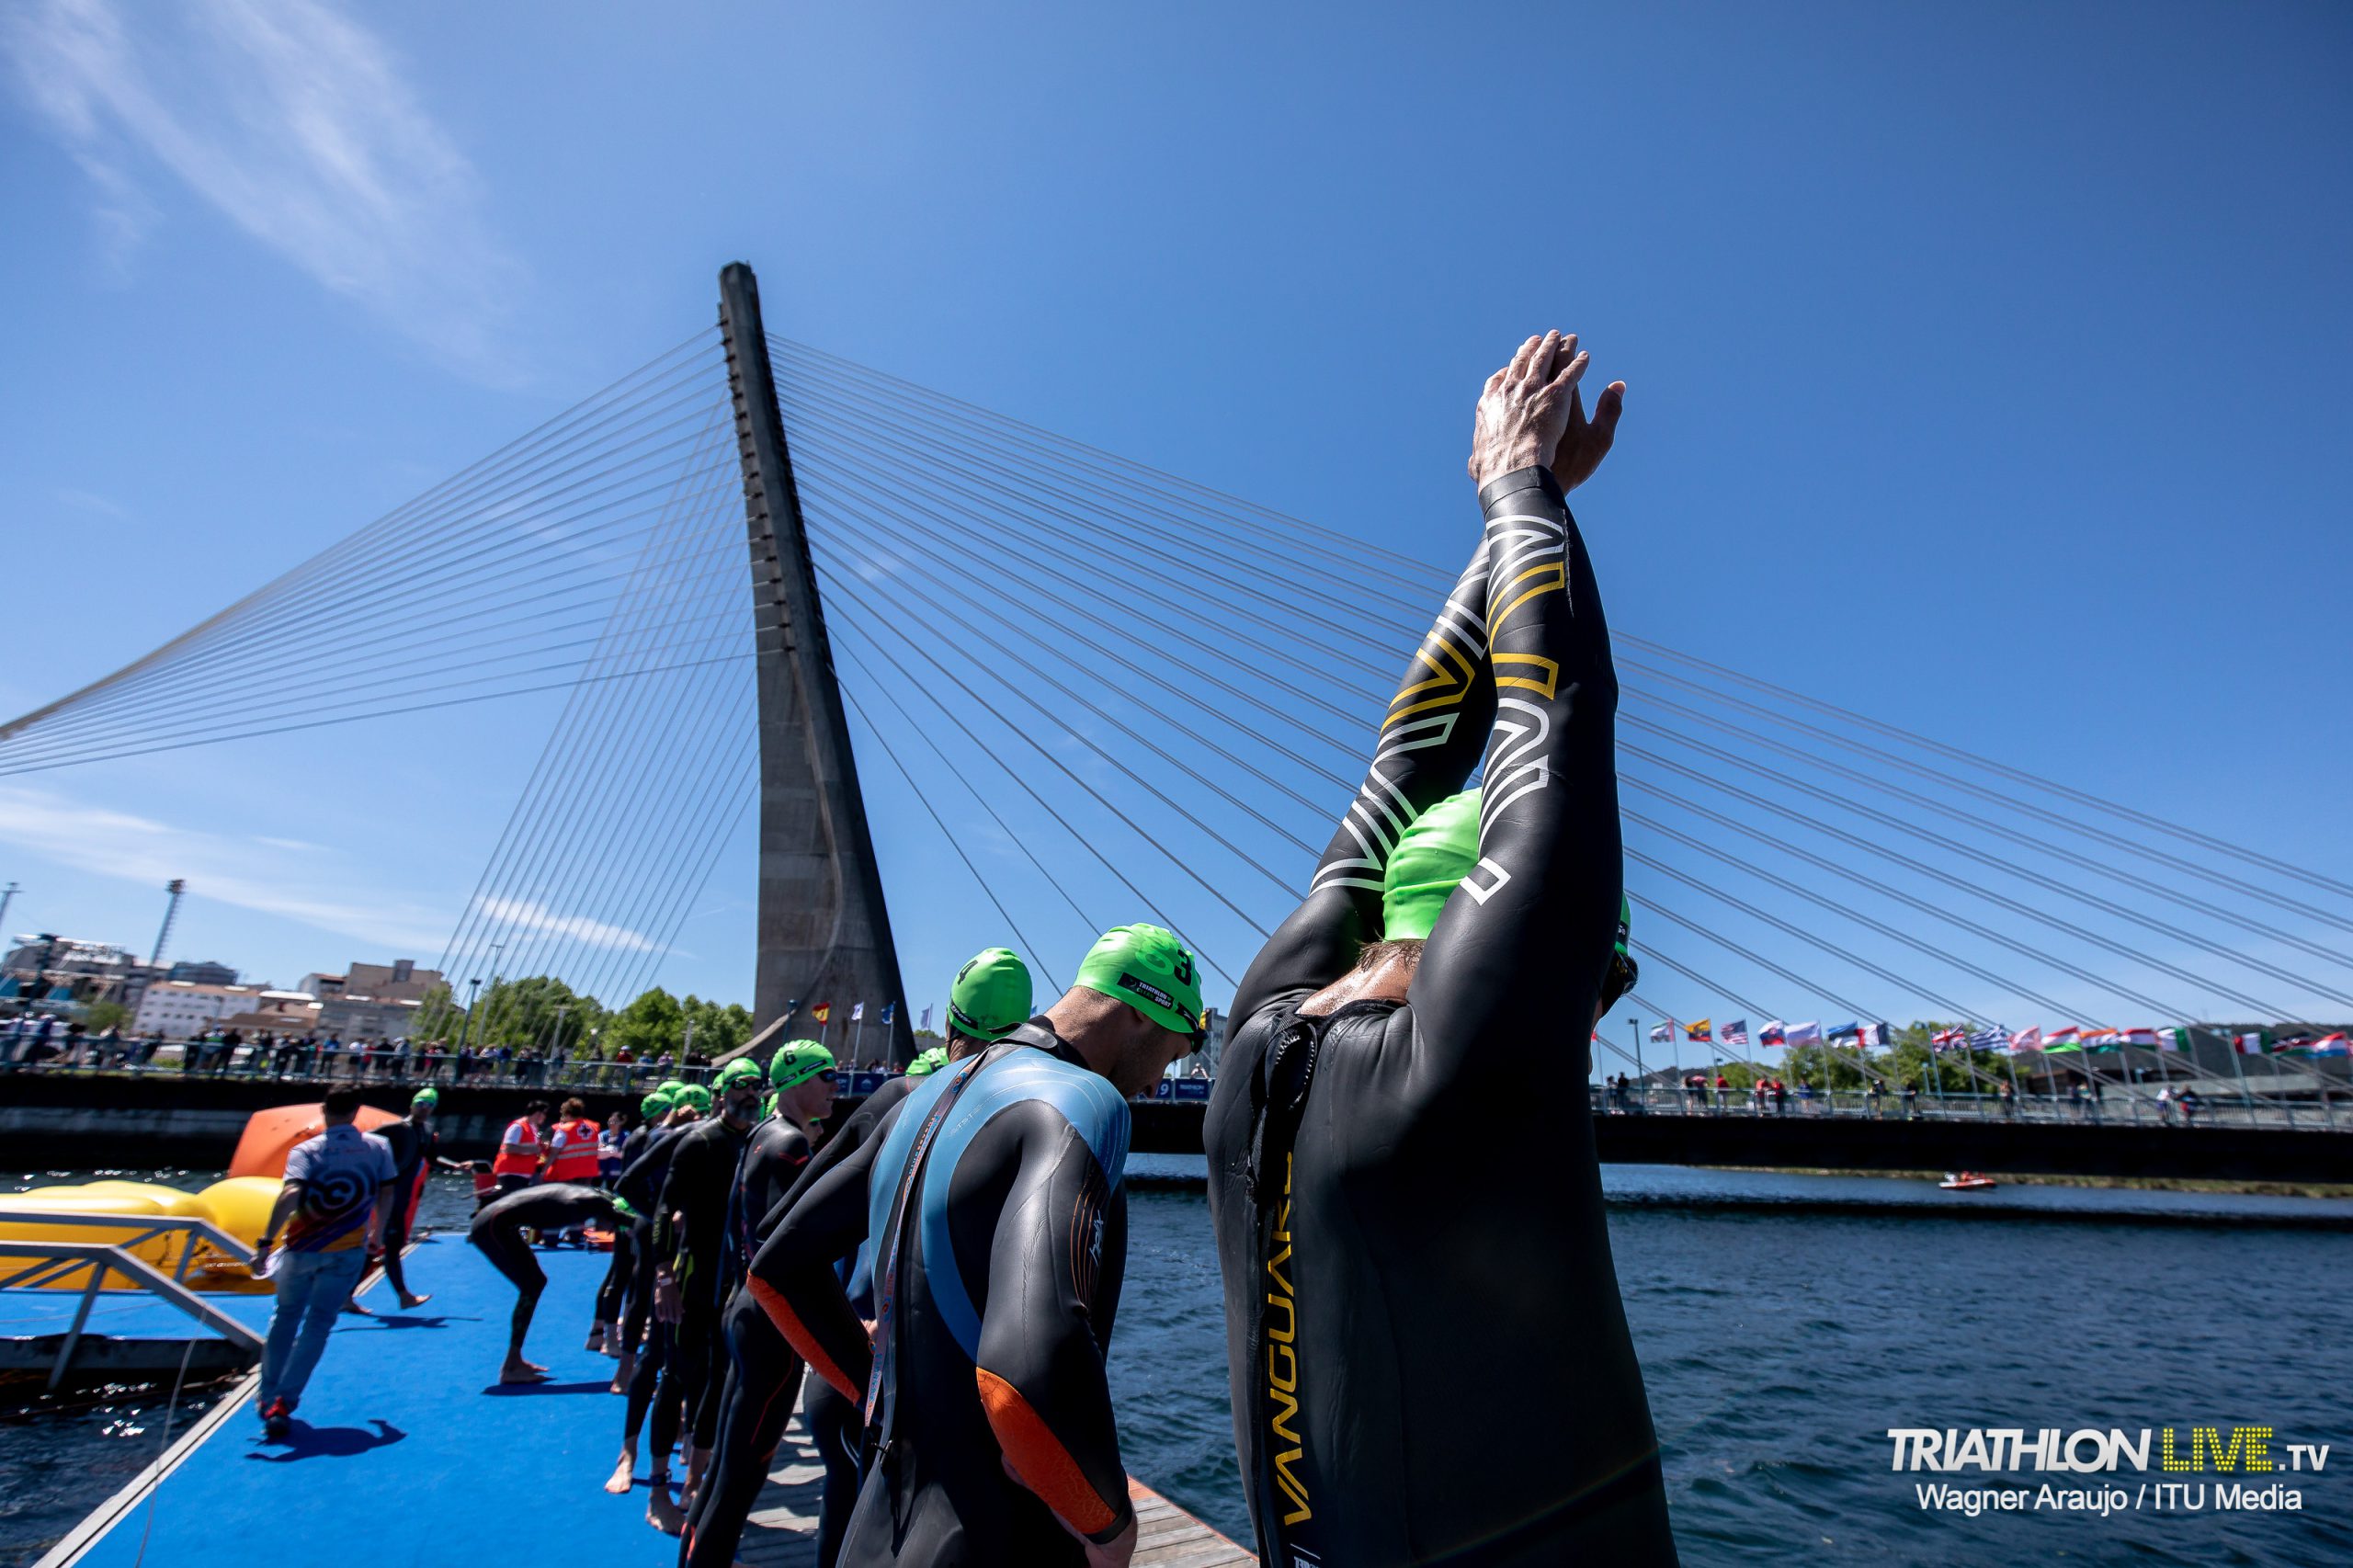 Pontevedra to host the Multisport Championships for the second time